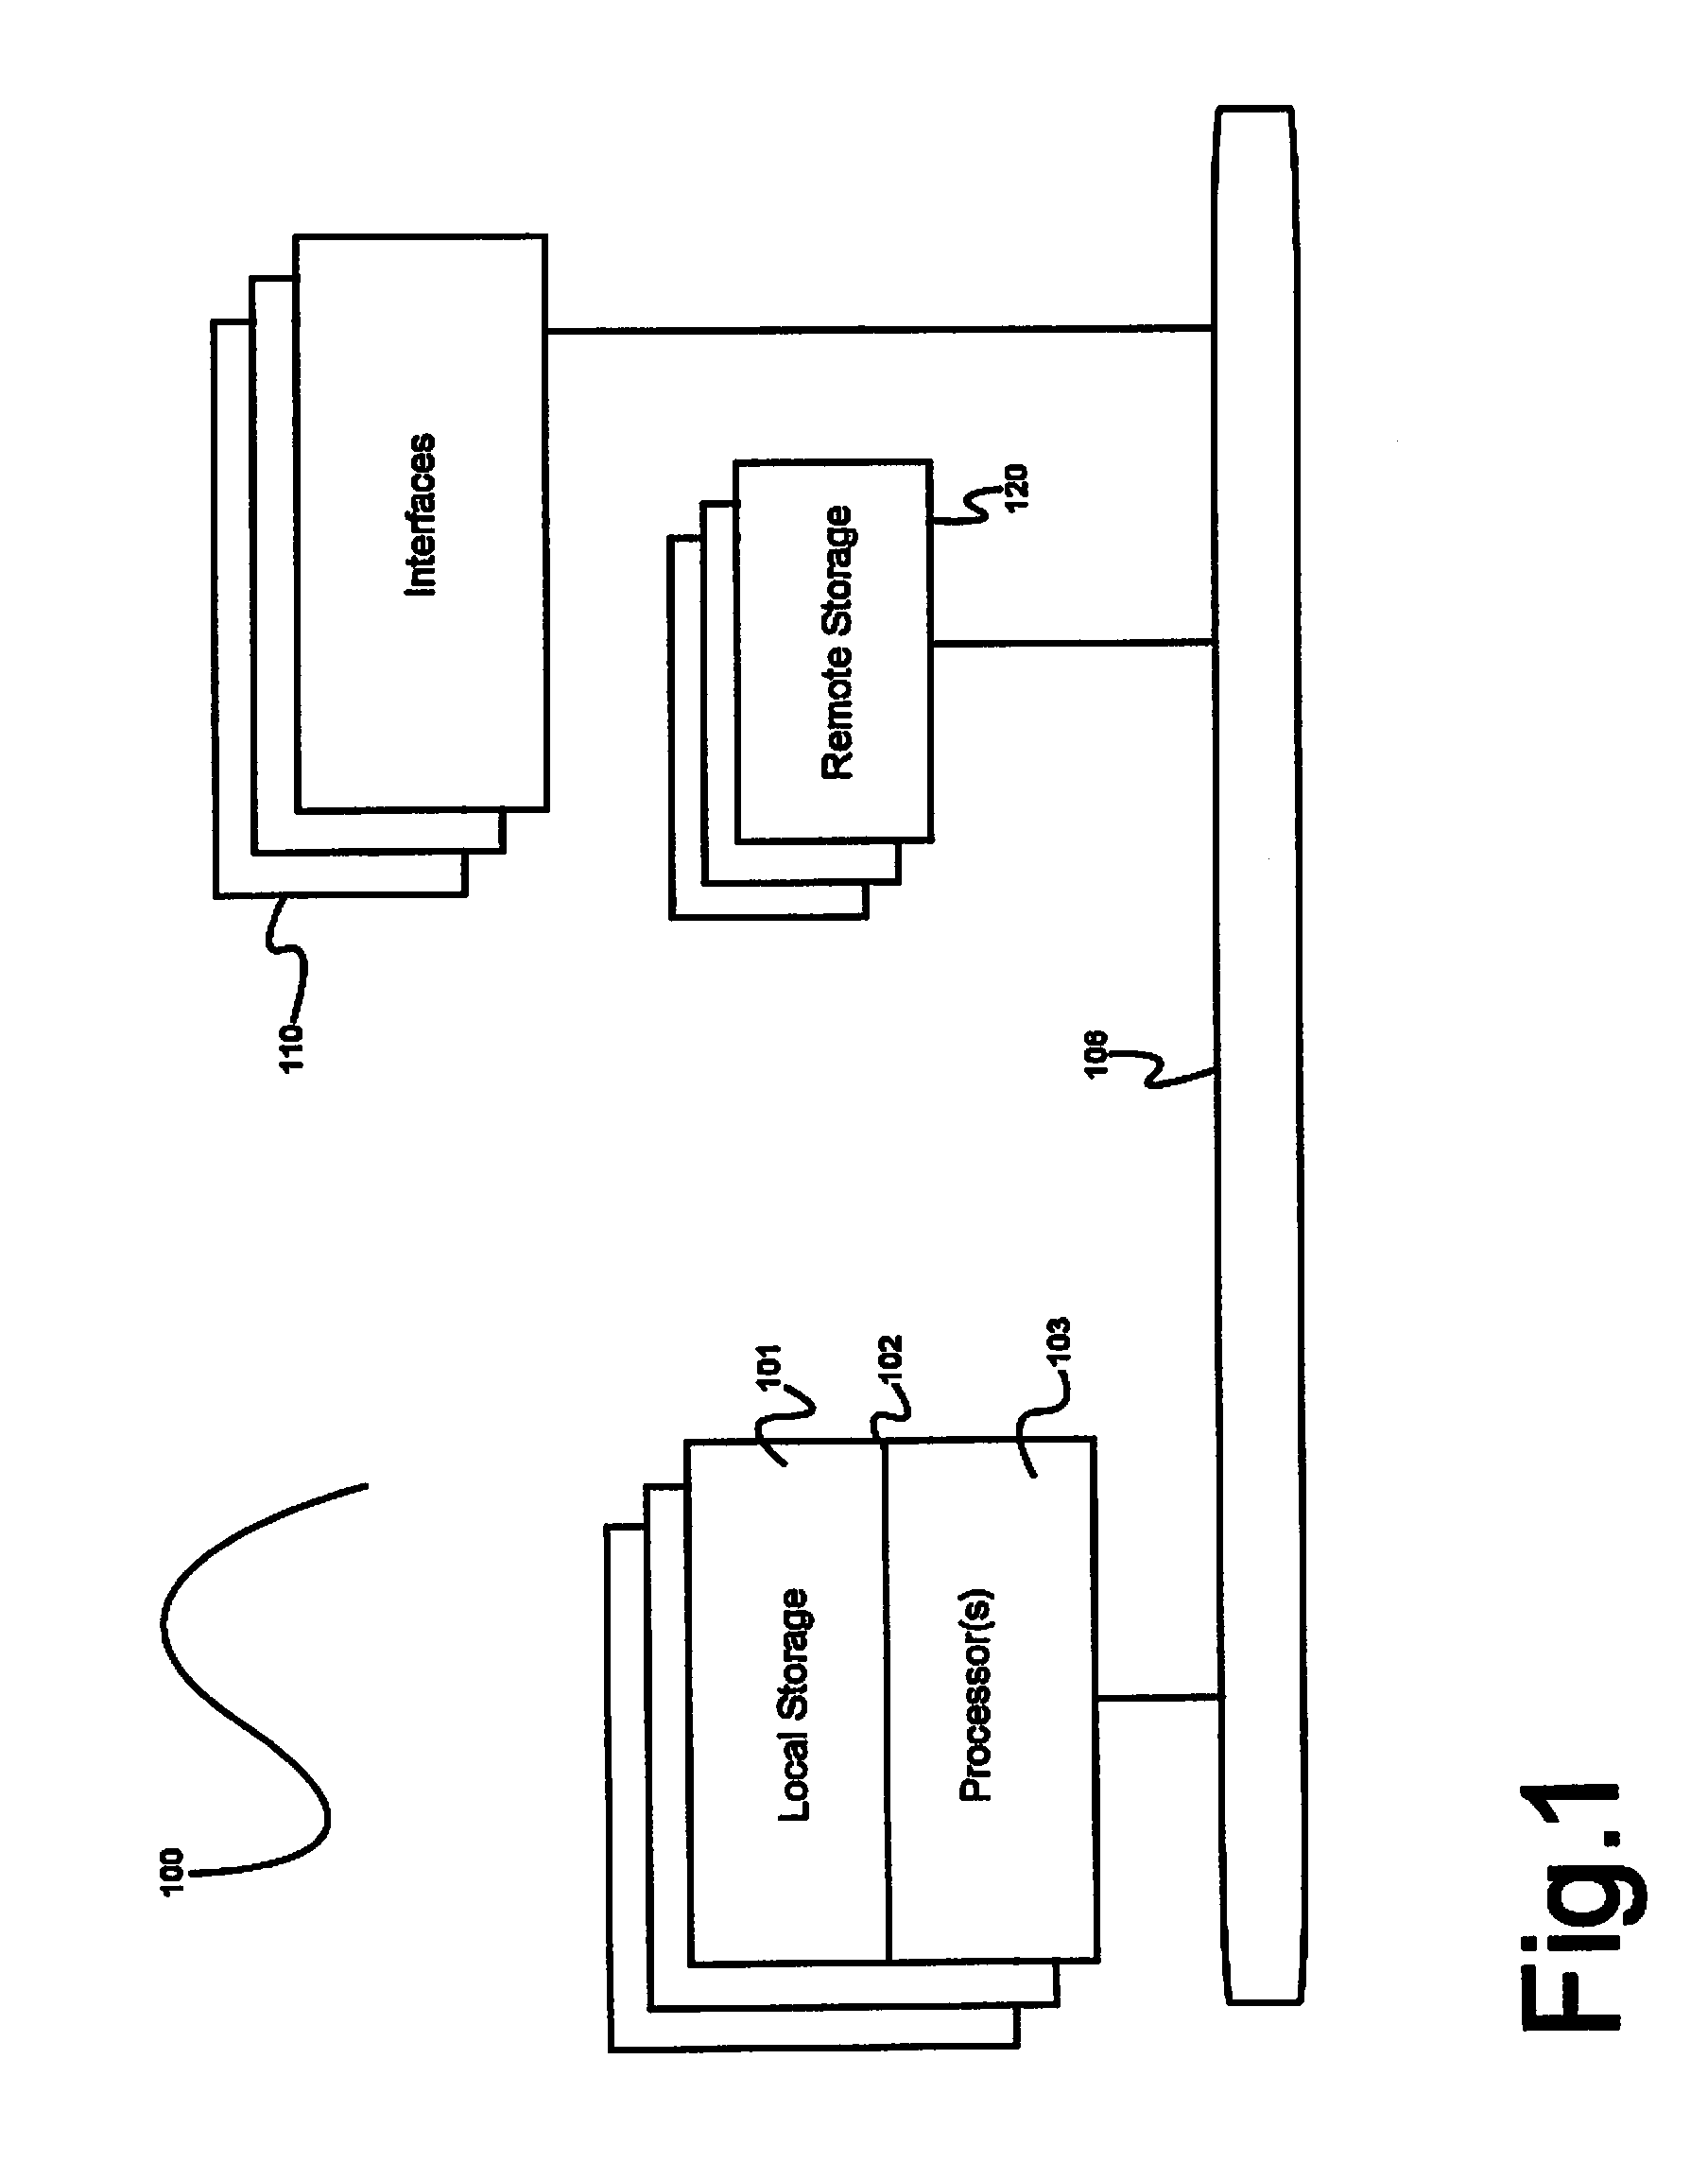 System and methods for semiautomatic generation and tuning of natural language interaction applications